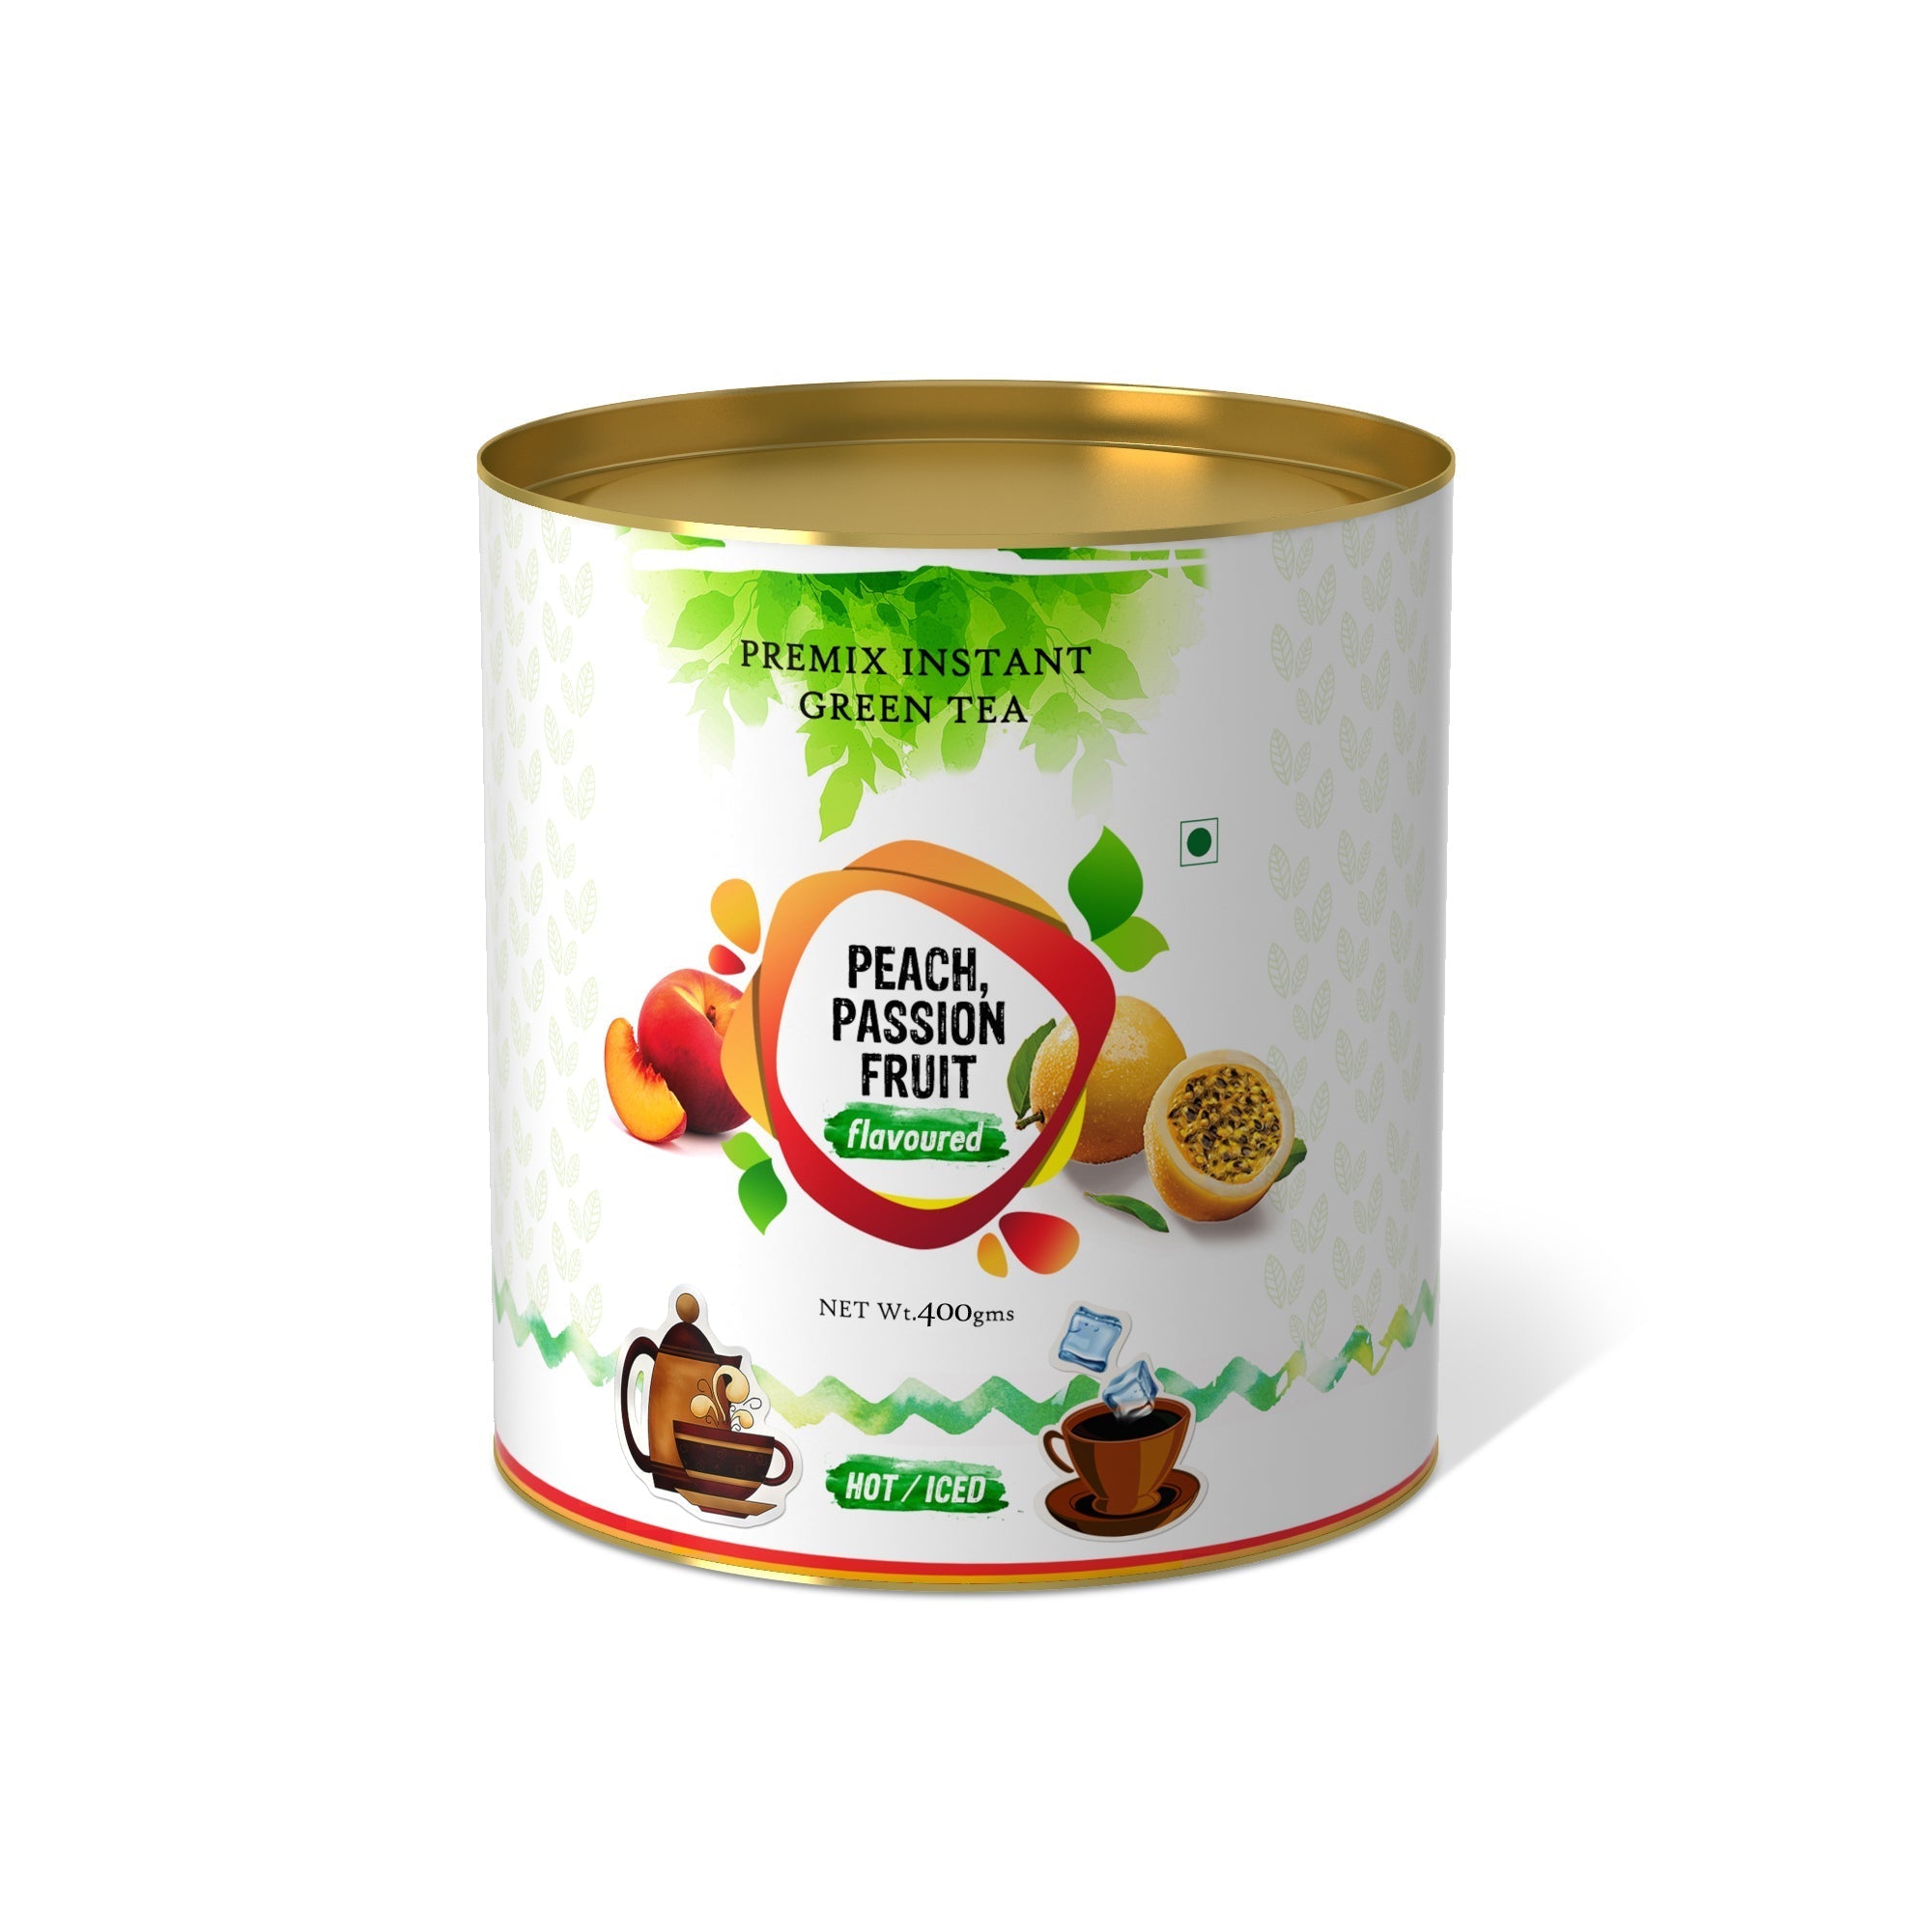 Peach & Passion Fruit Flavored Instant Green Tea - 400 gms